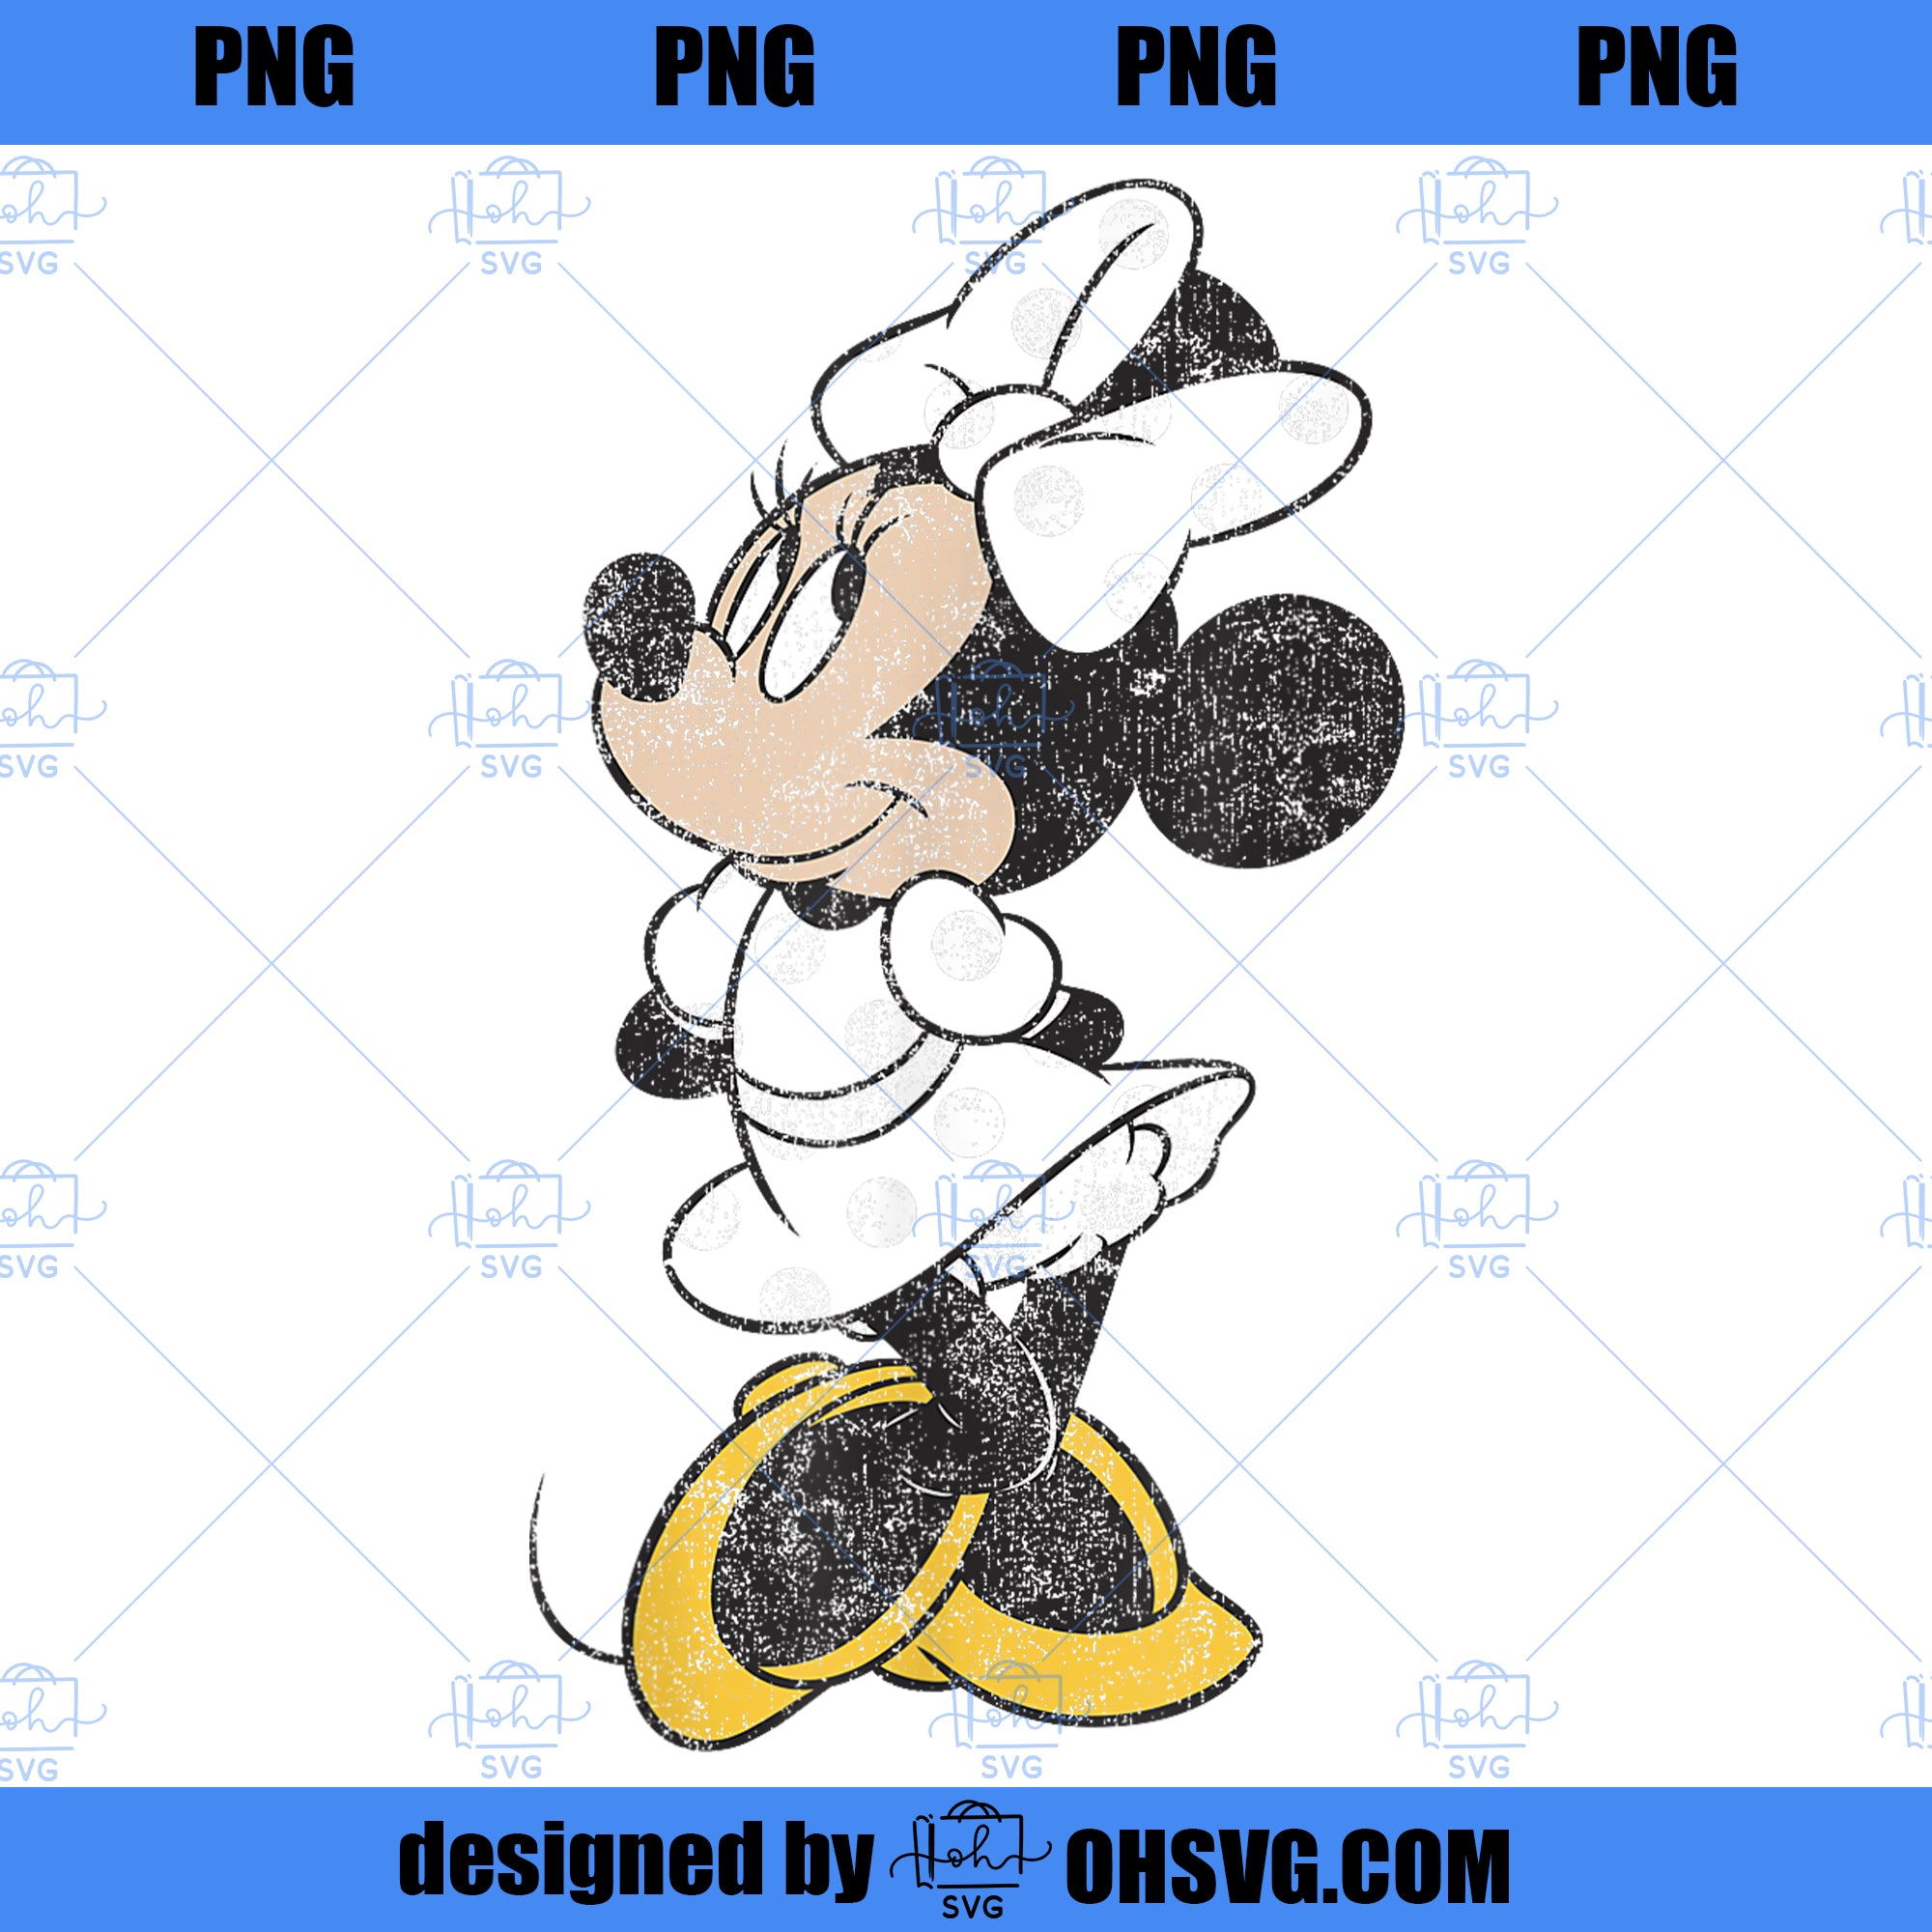 Disney Mickey And Friends Minnie Mouse Simple Distressed PNG, Disney PNG, Mickey Friends PNG